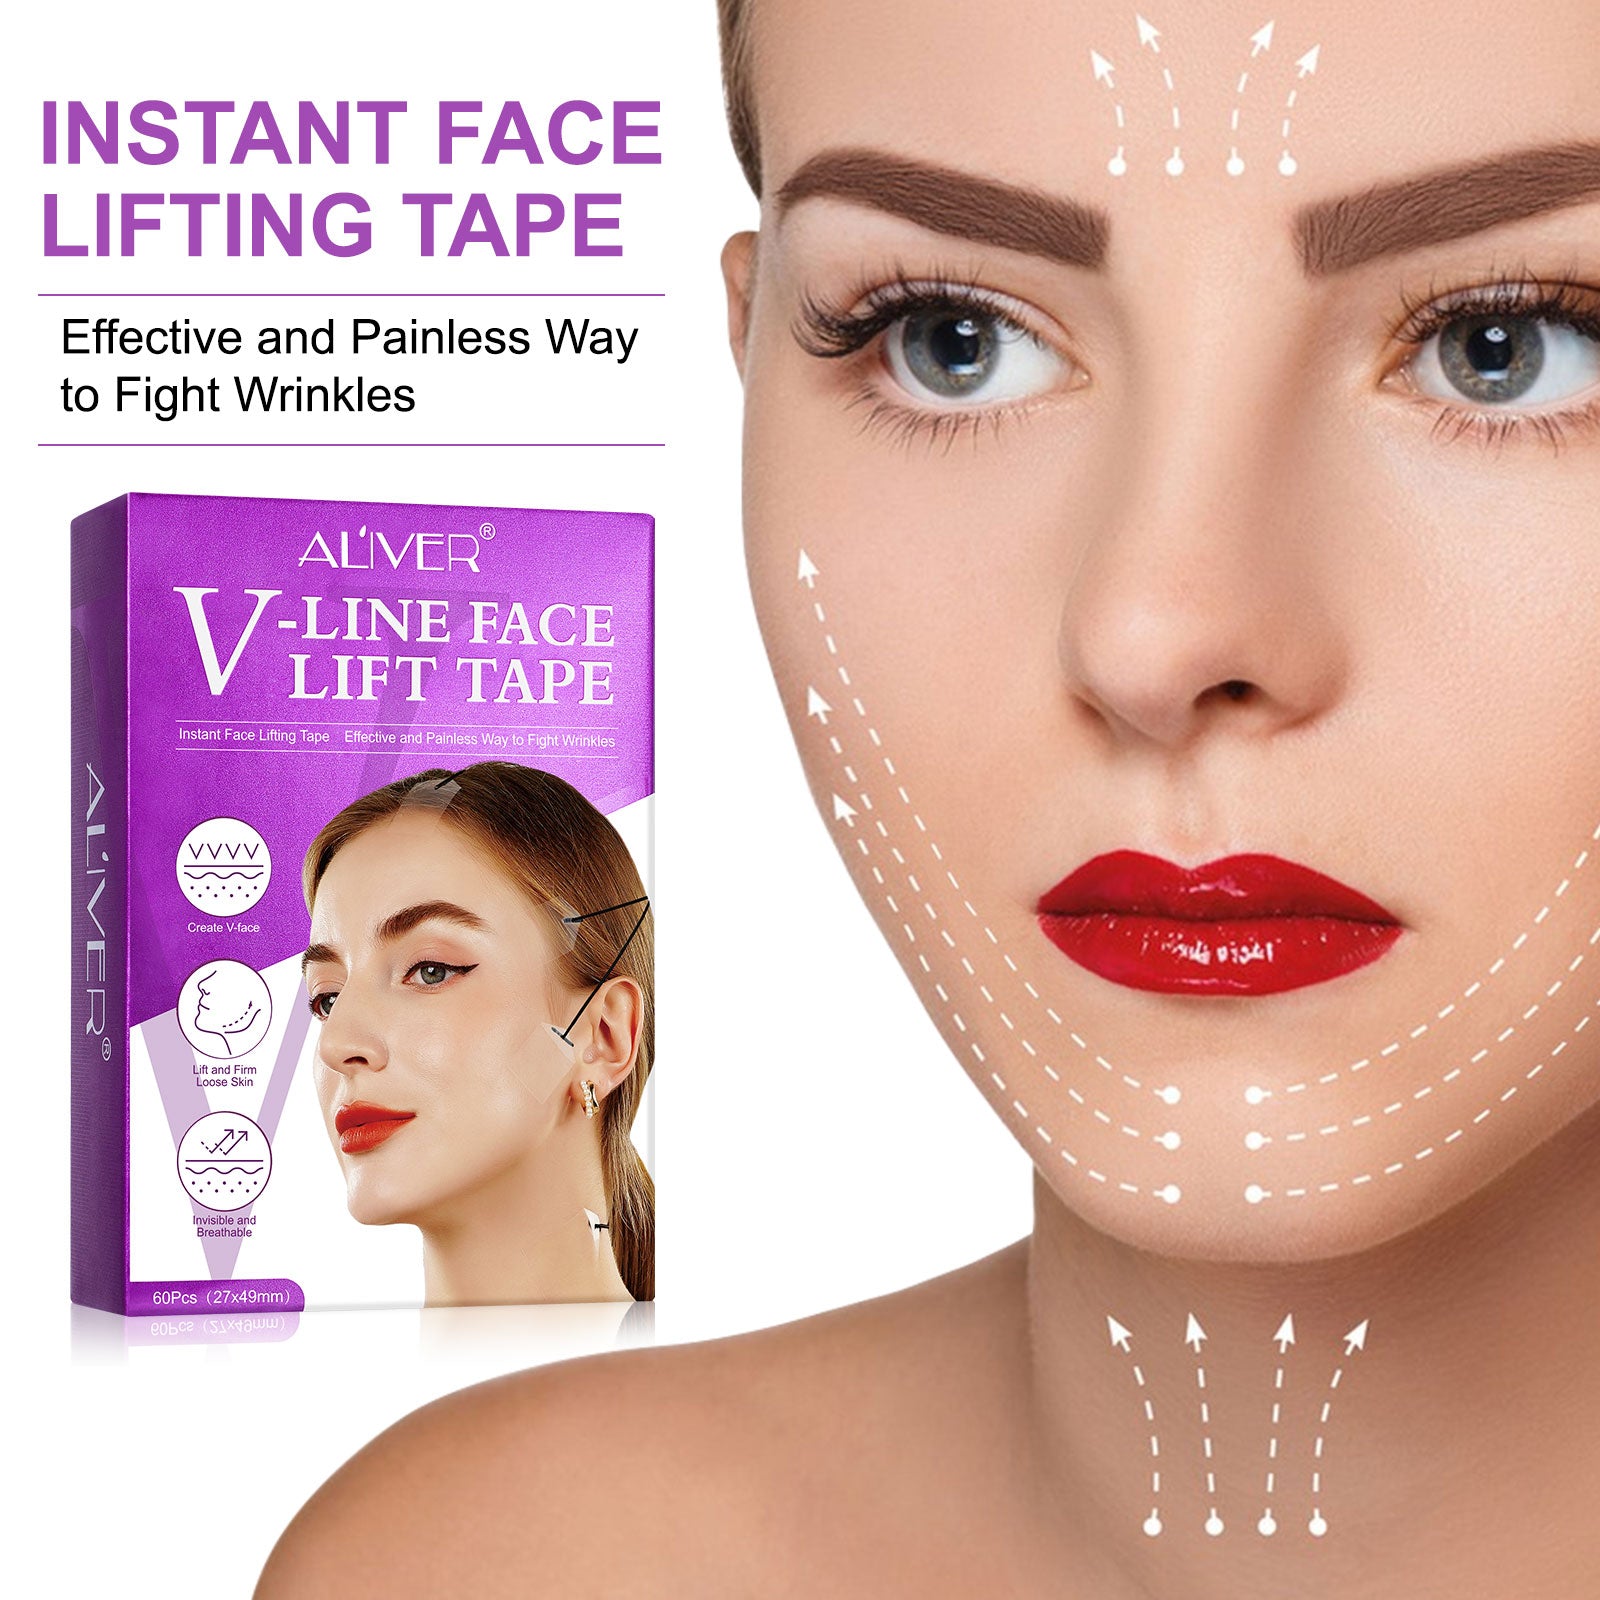 Aliver Instant Face Lifting Tape, Effective and Painless Way to Fight